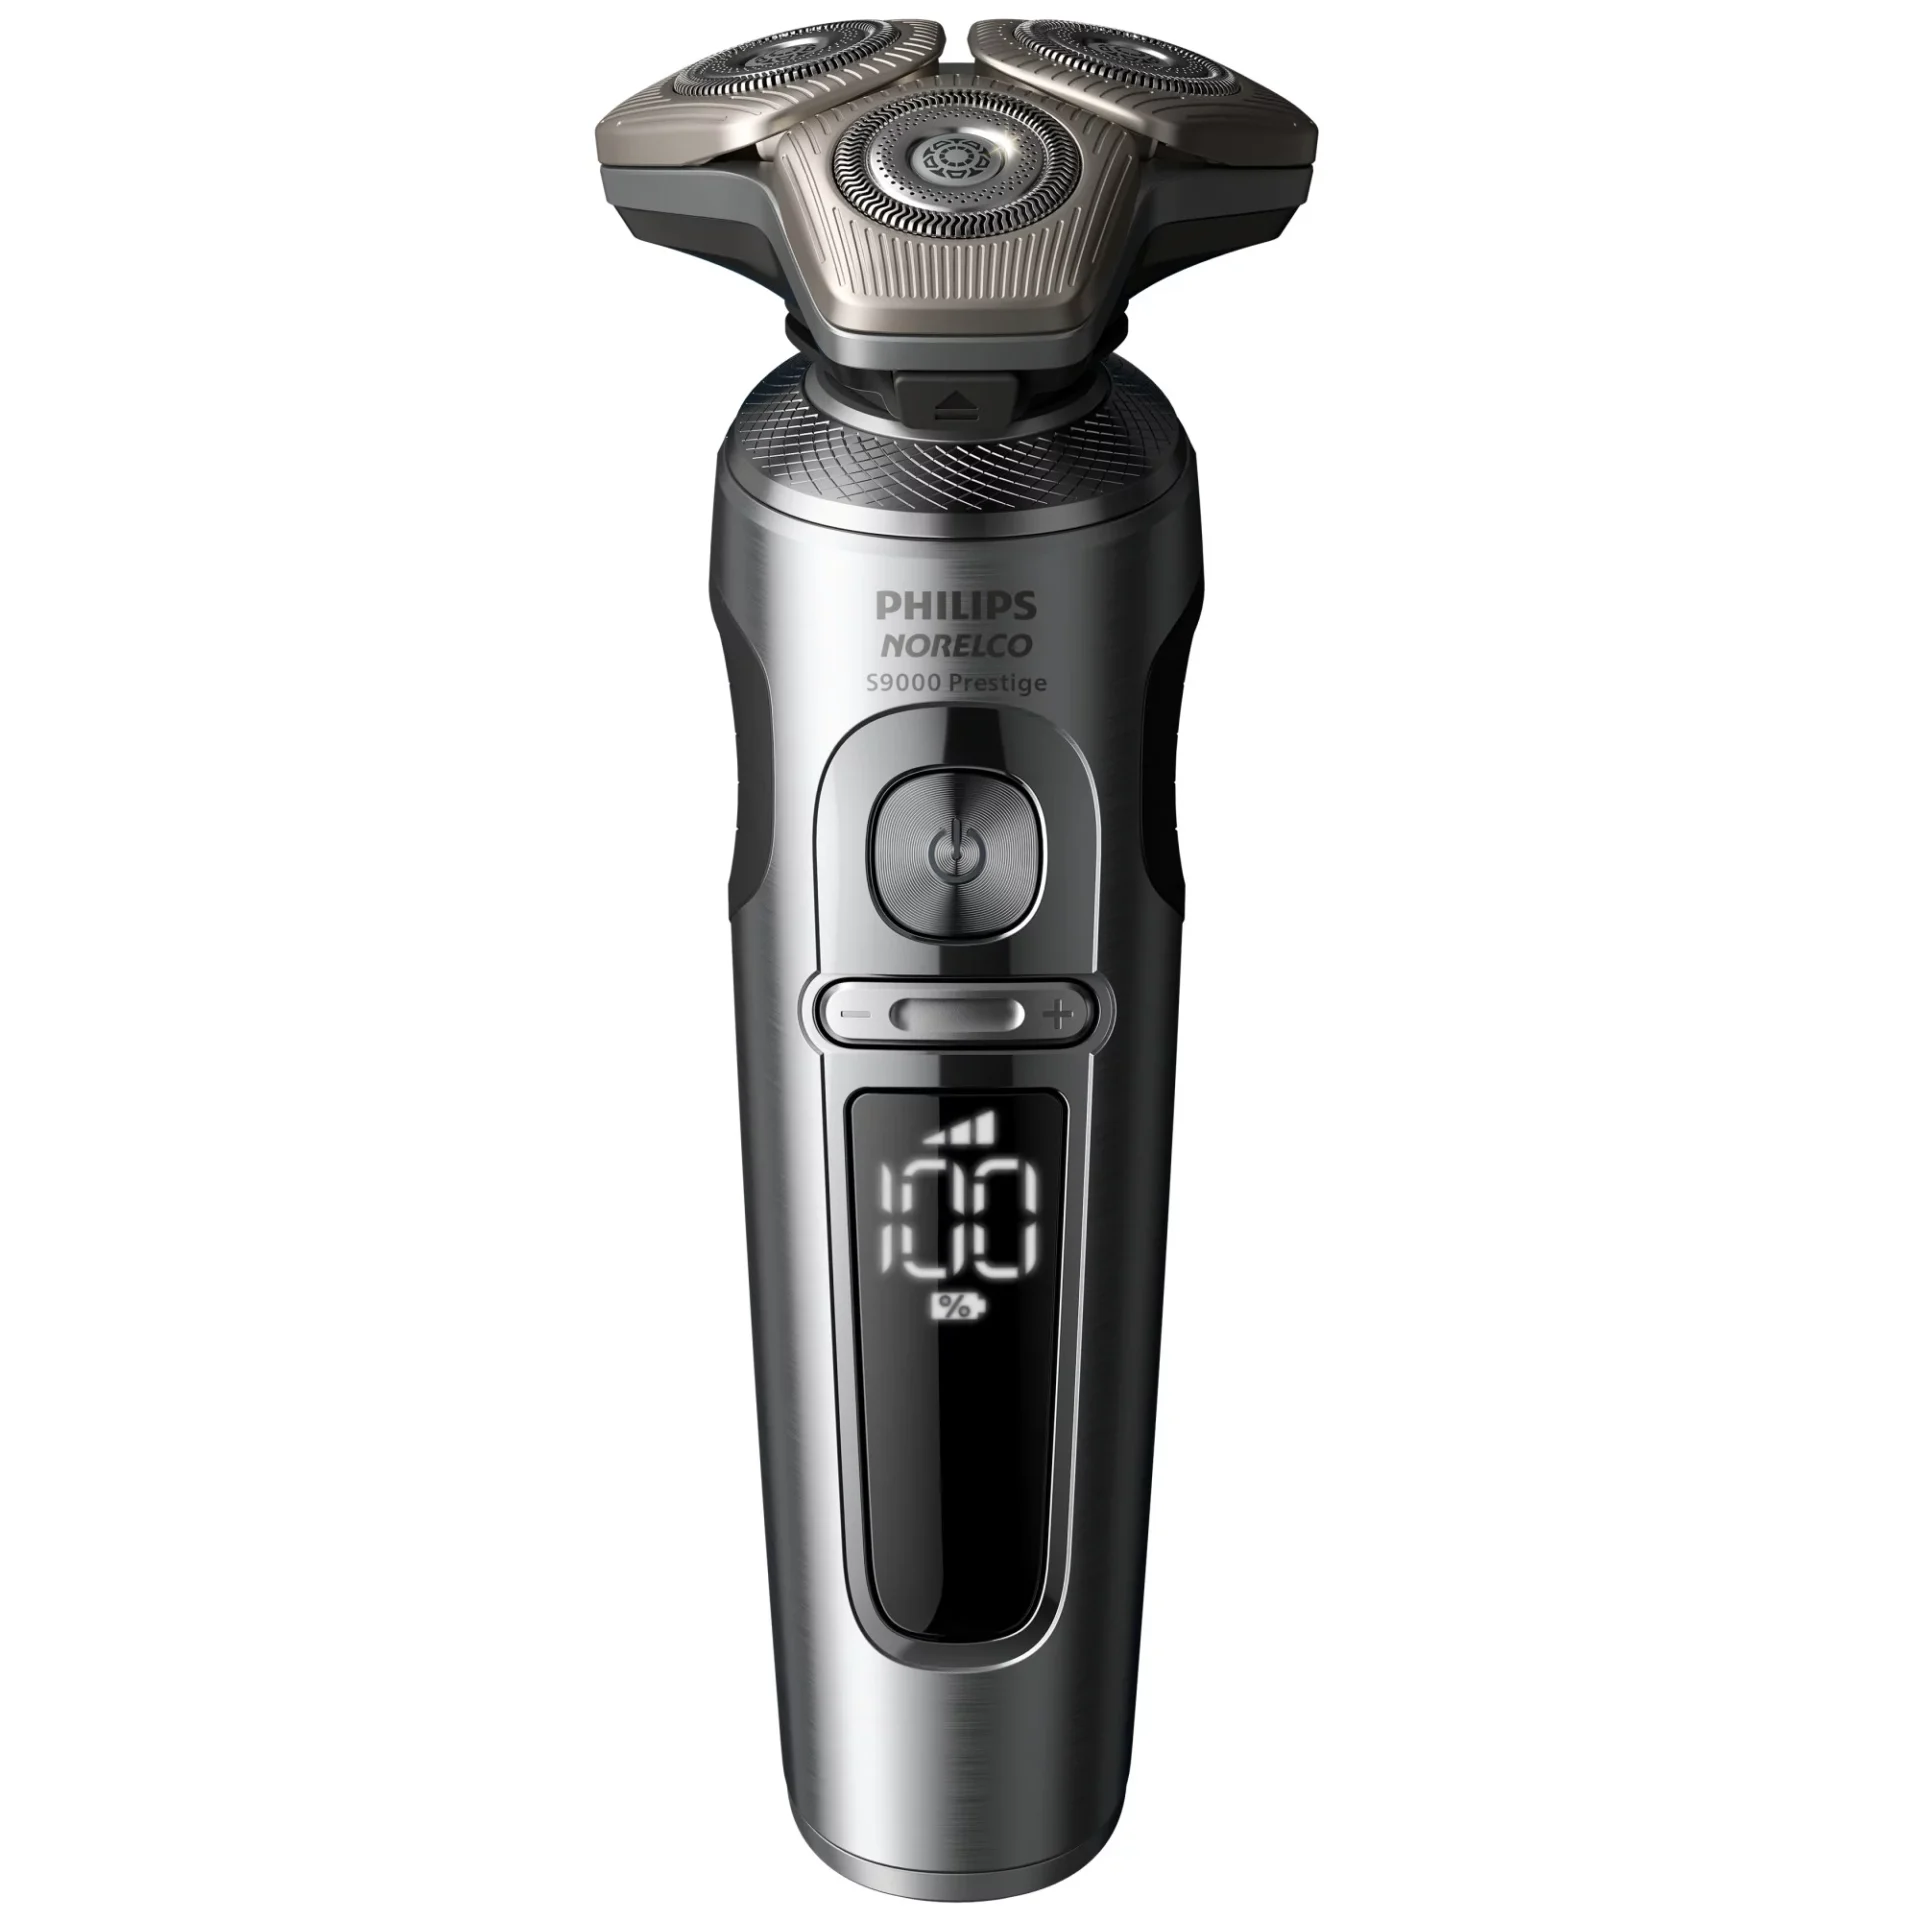 A silver electric razor with an lcd display.